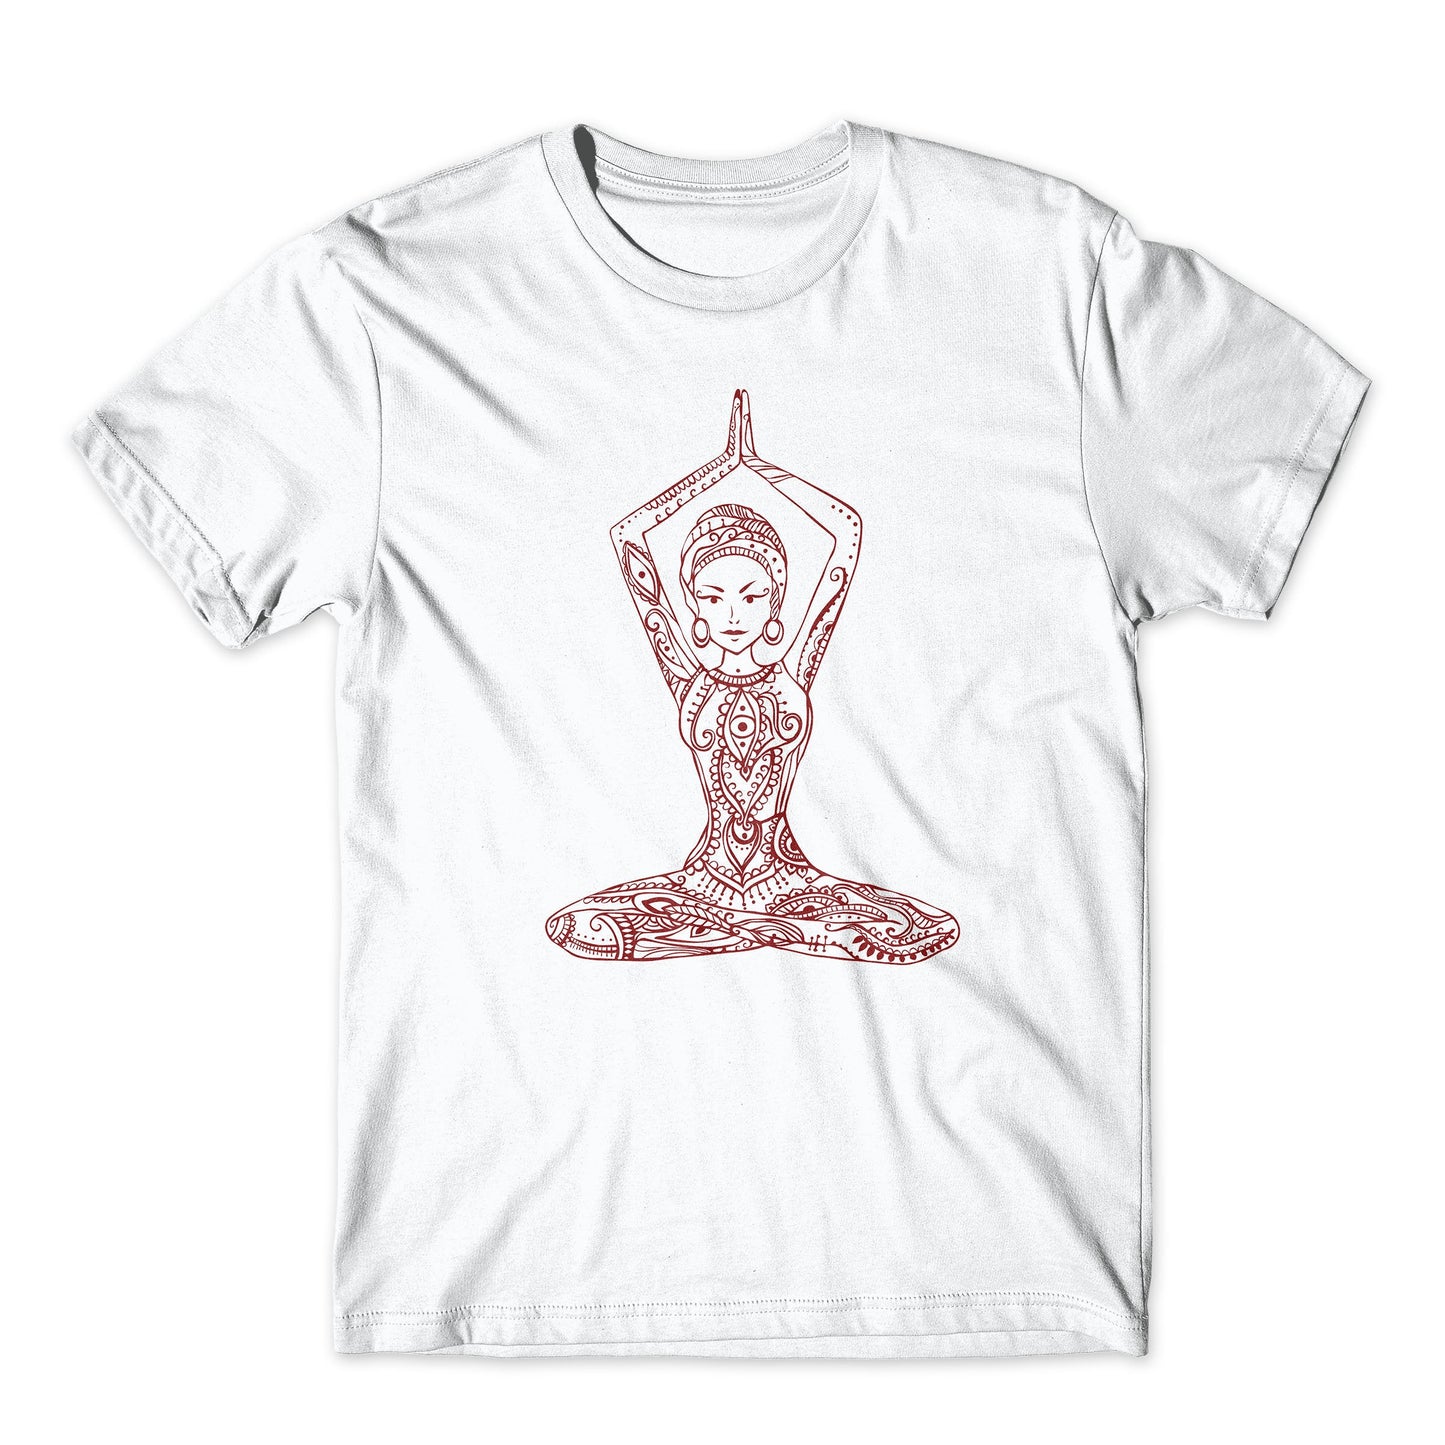 Yoga Tee On White Soft Cotton Premium T-Shirt. Comfy and Fits Like Your Favorite Tee!